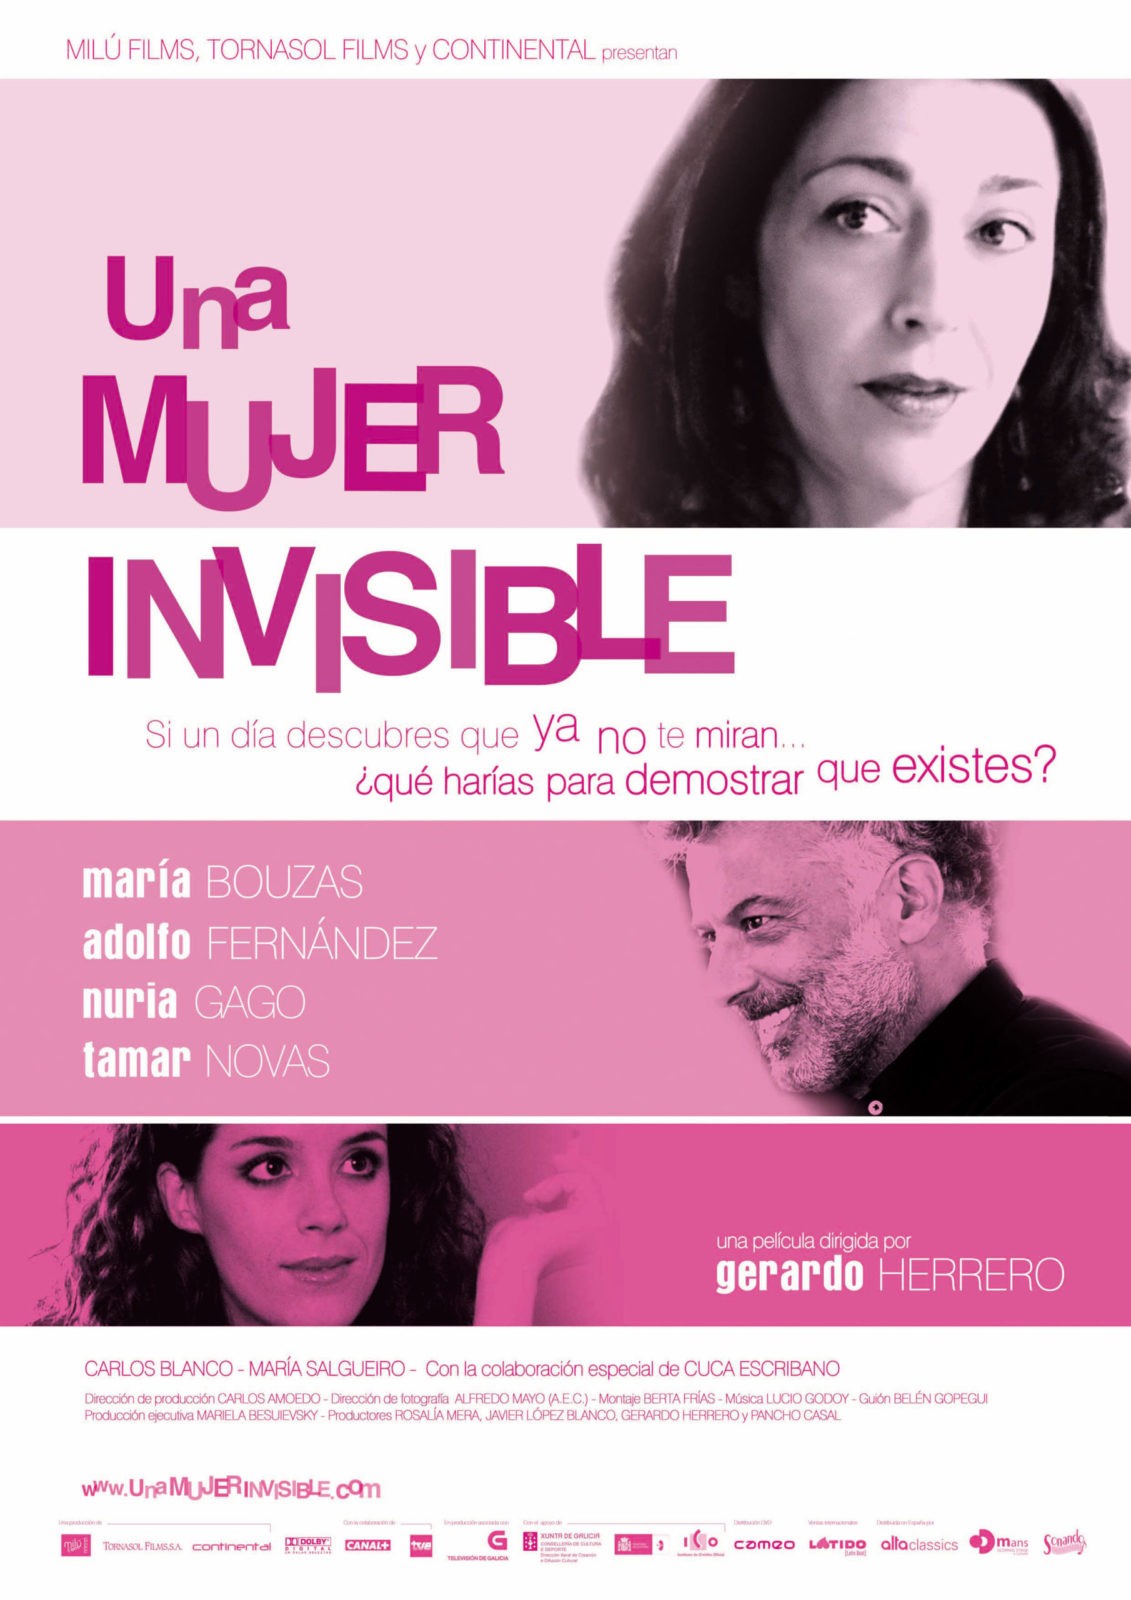 AN INVISIBLE WOMAN